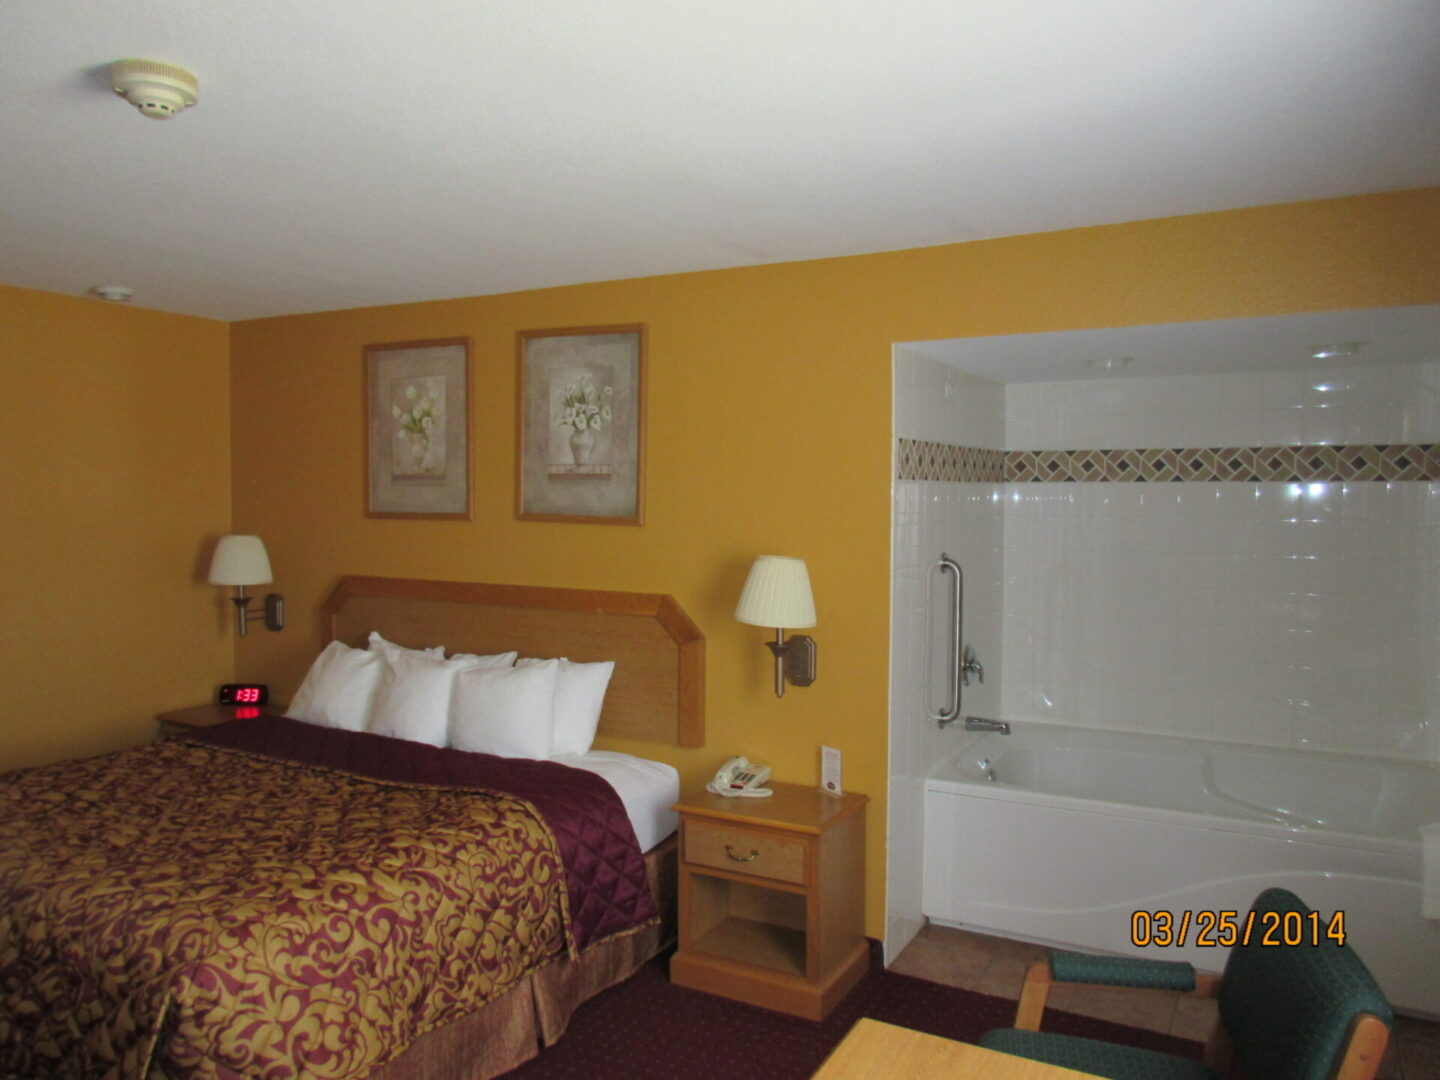 Luxury hotel bedroom with attached bathroom and white bed